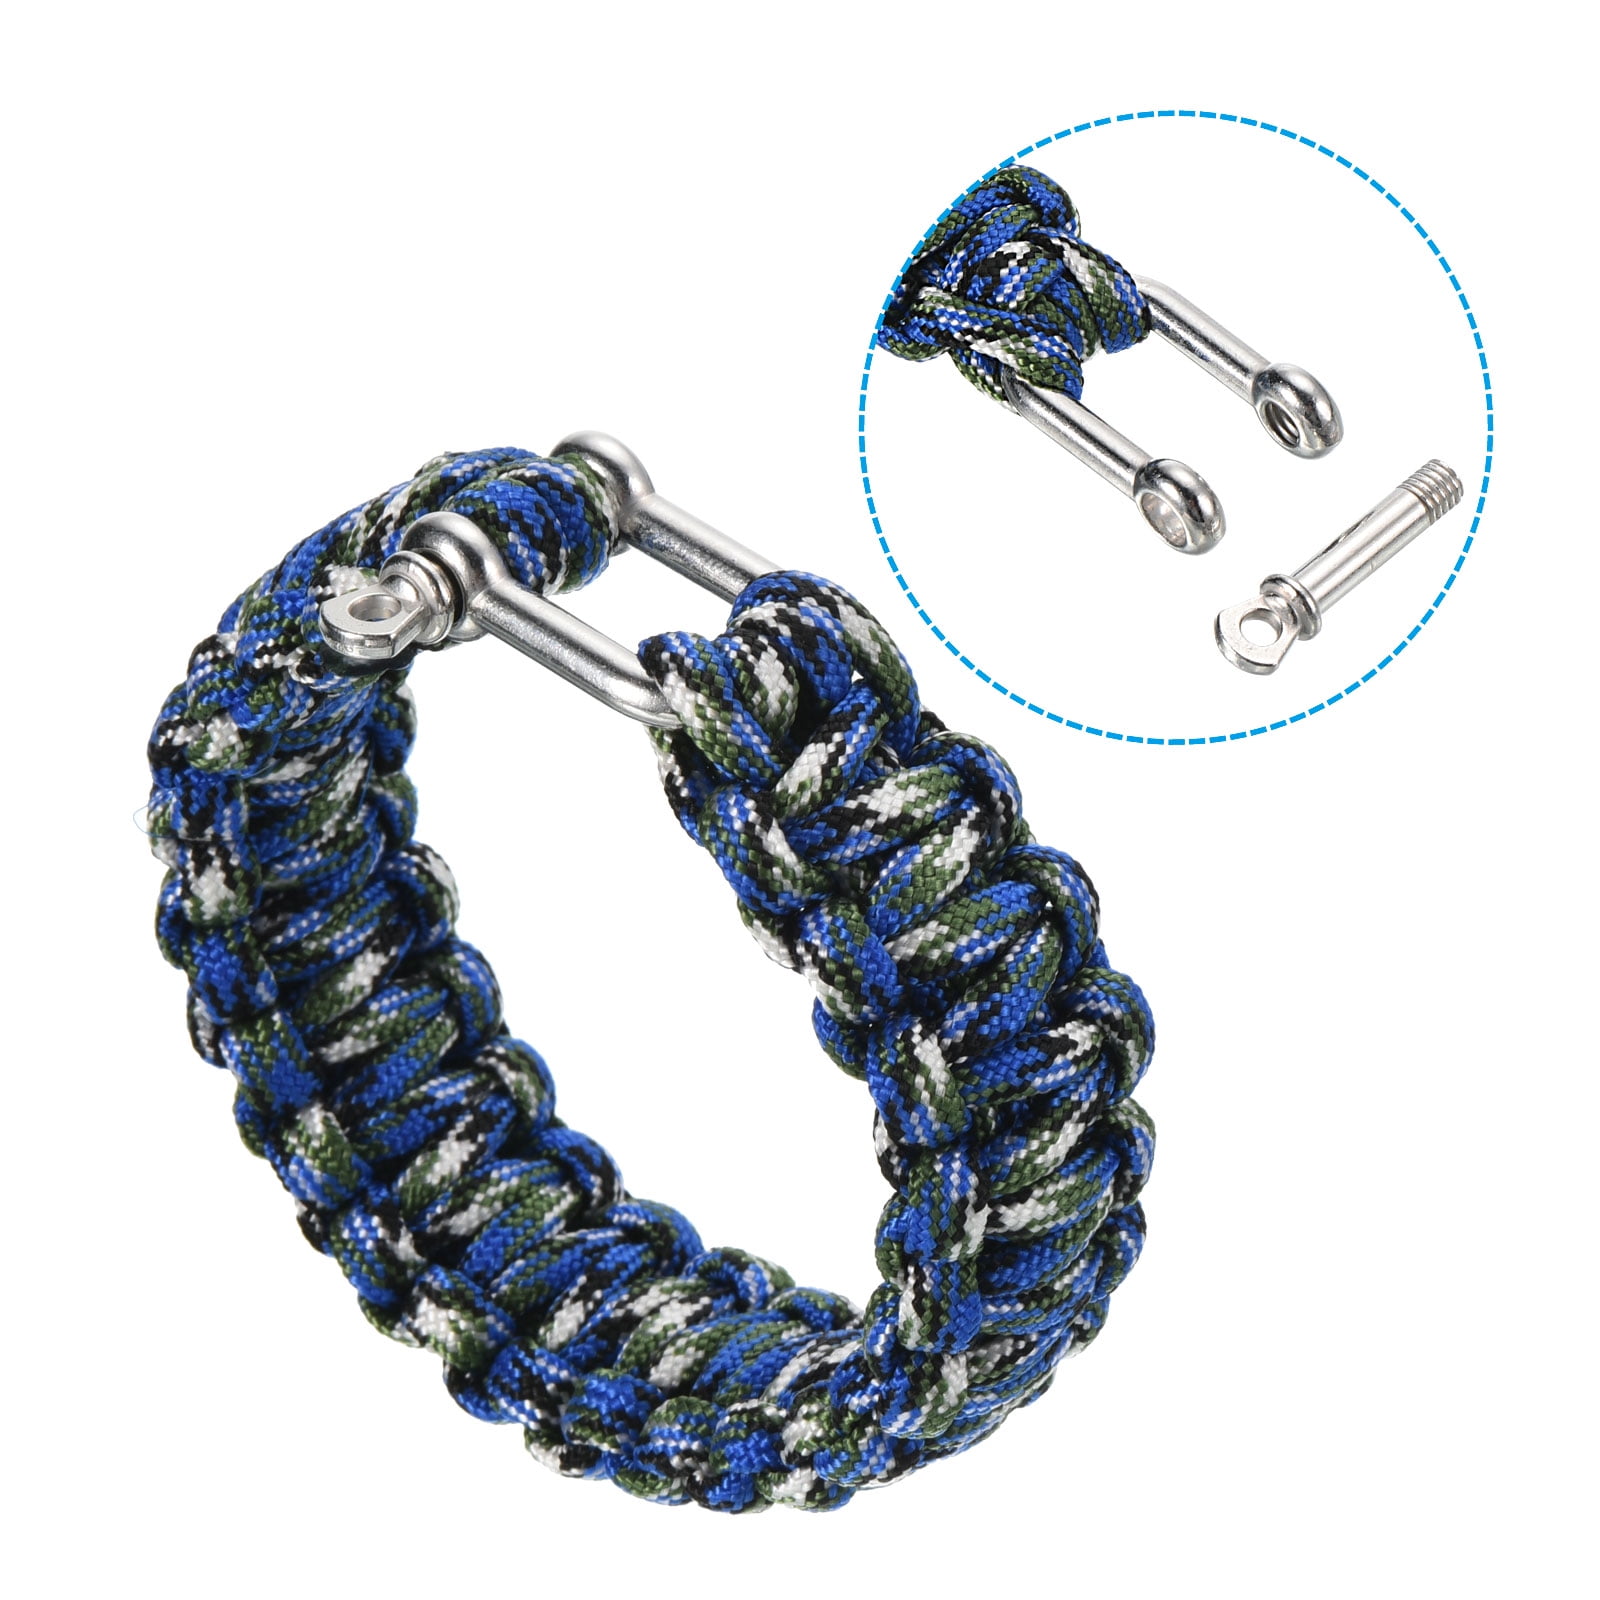 Everyday Jewelry Blue Green White and Black Nylon Paracord Bracelet Jewelrys - Bracelet, Nylon Paracord Plastic, Multicolored, 18mm Wide Survival Camo